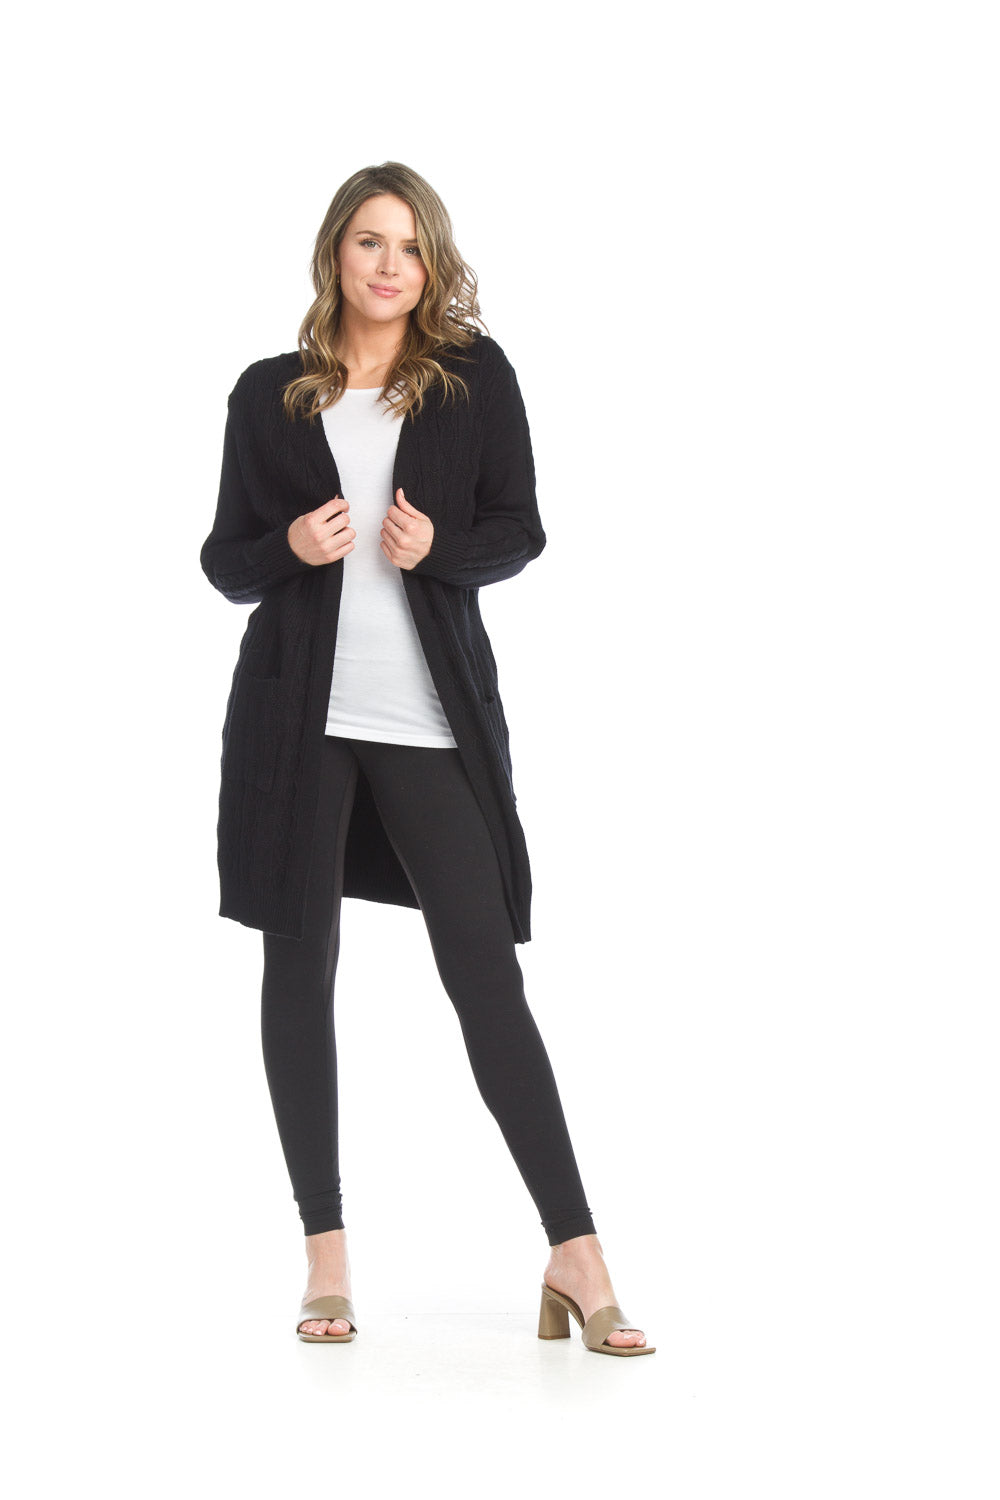 ST-11220 - Black - Soft Cable Knit Cardigan with Pockets